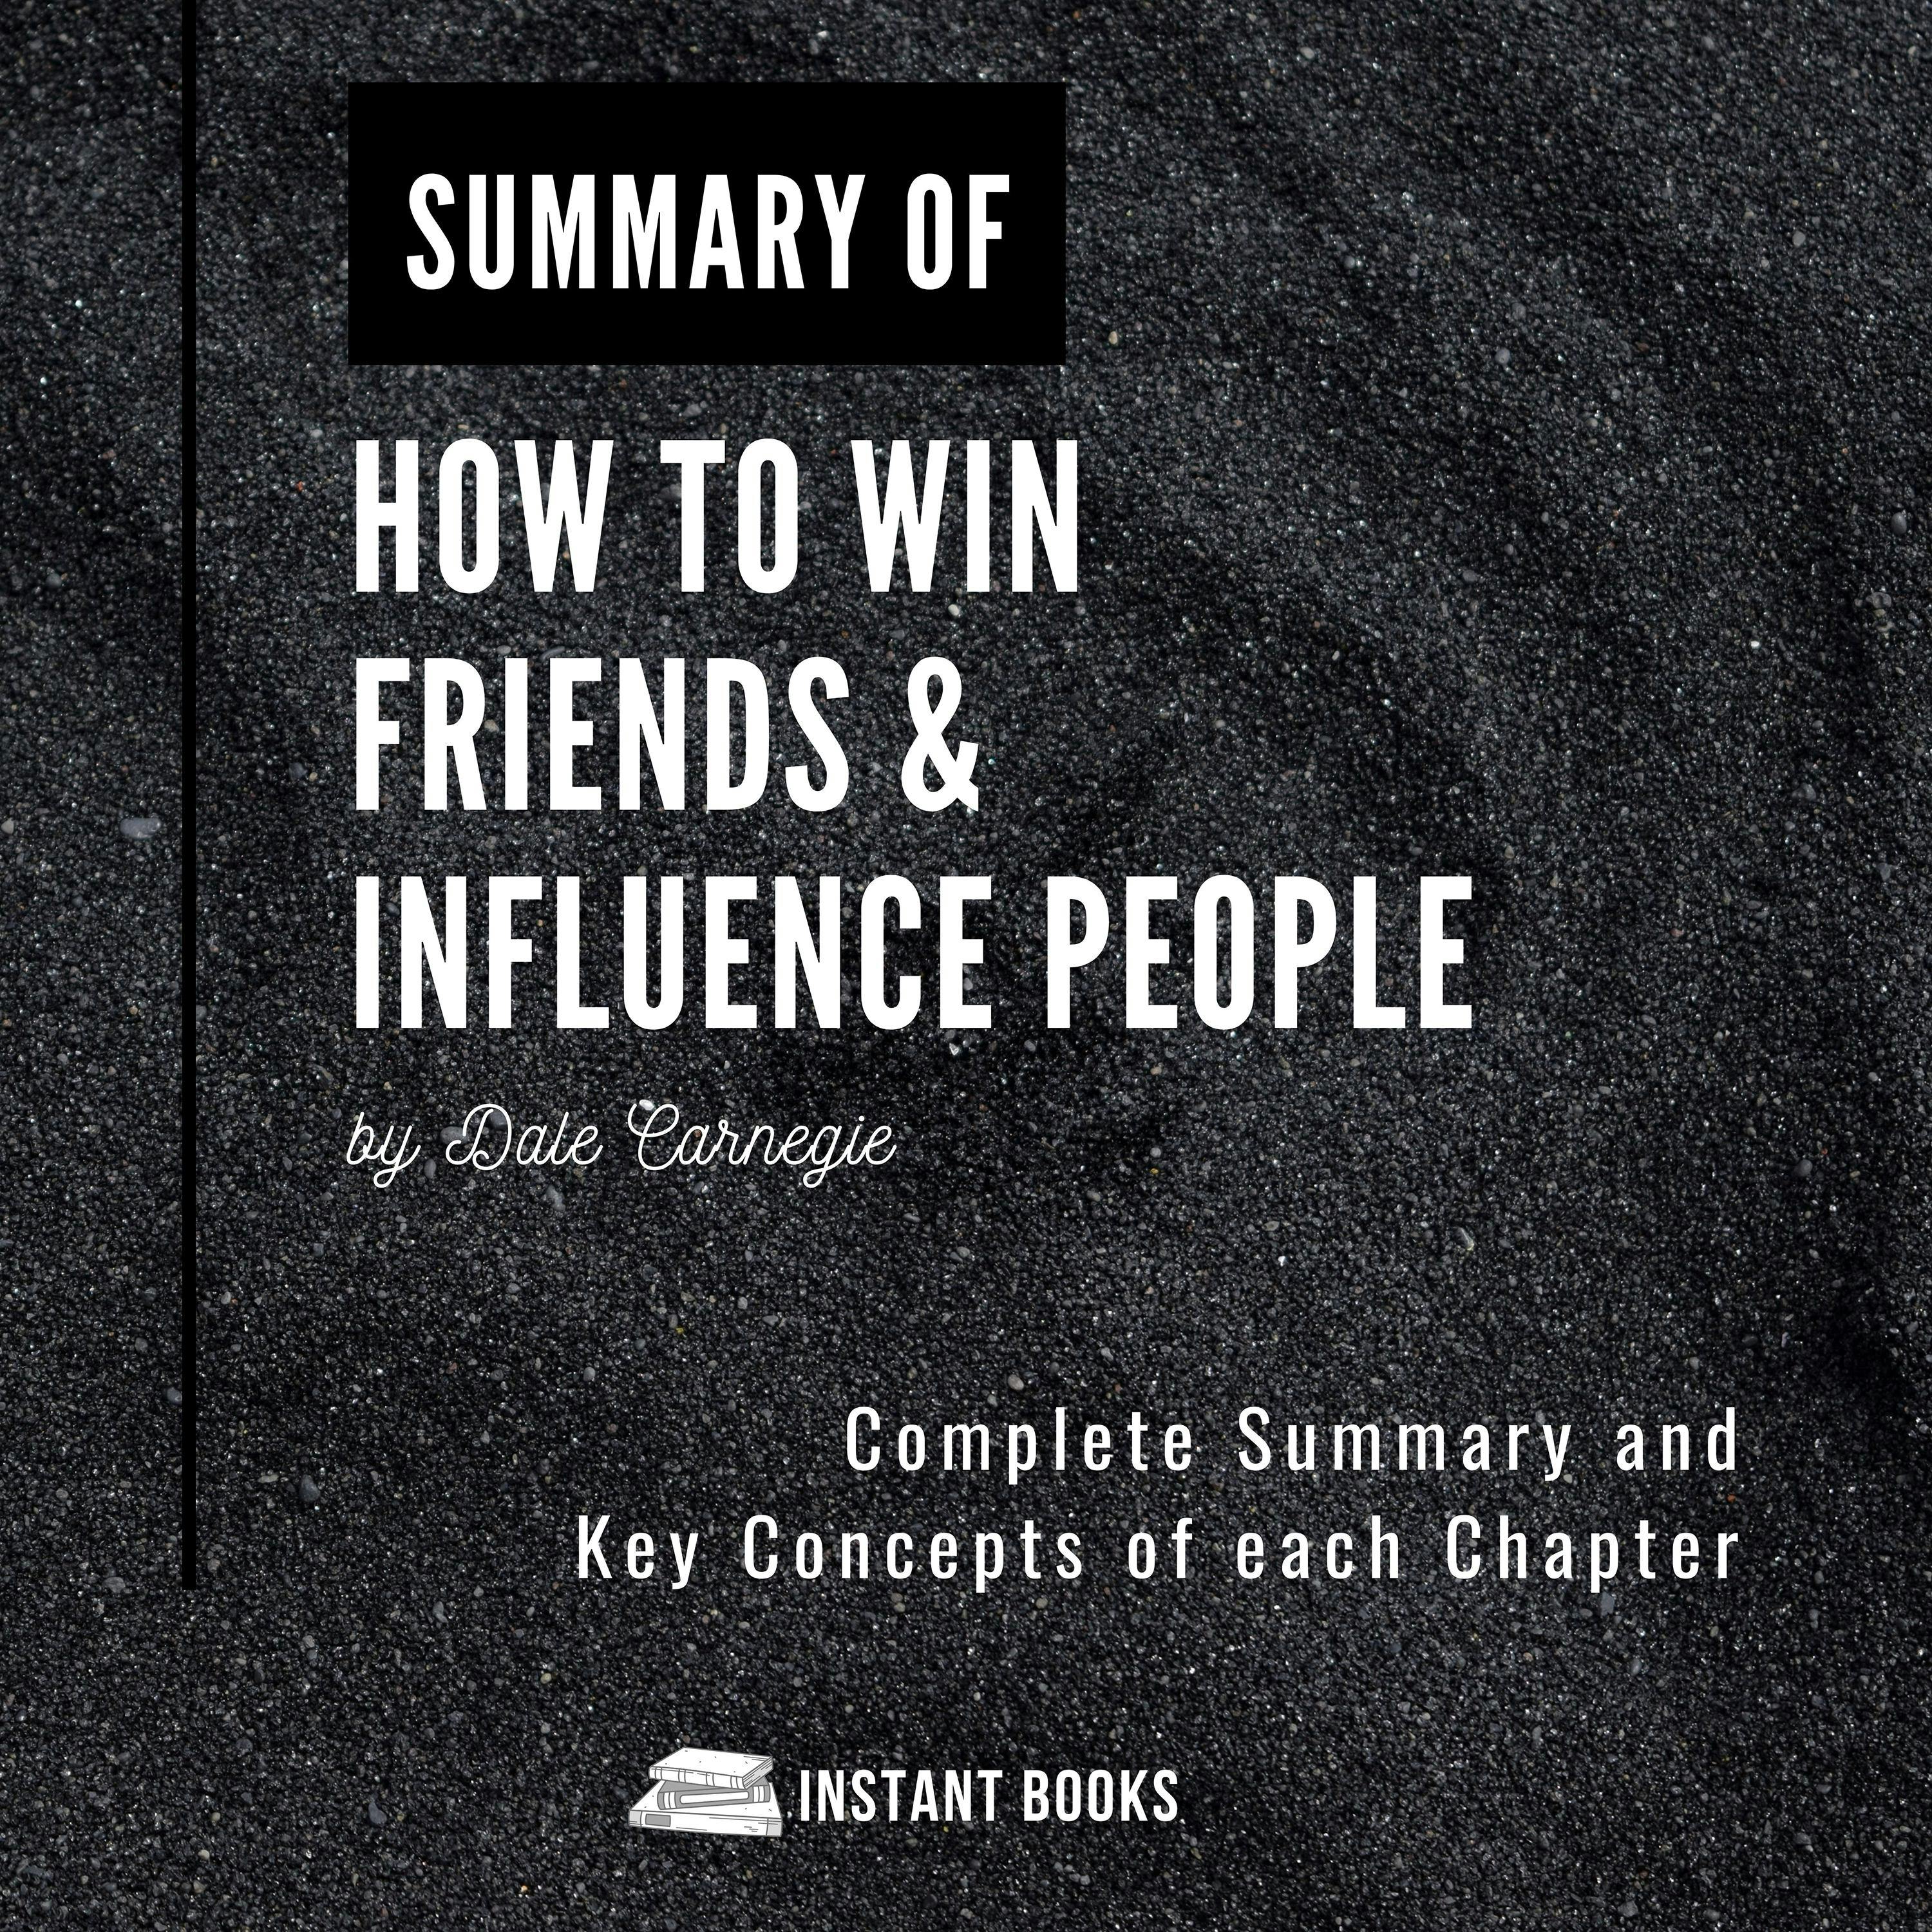 Summary of How to Win Friends & Influence People: by Dale Carnegie: Complete Summary and Key Concepts of each Chapter - Istant Books